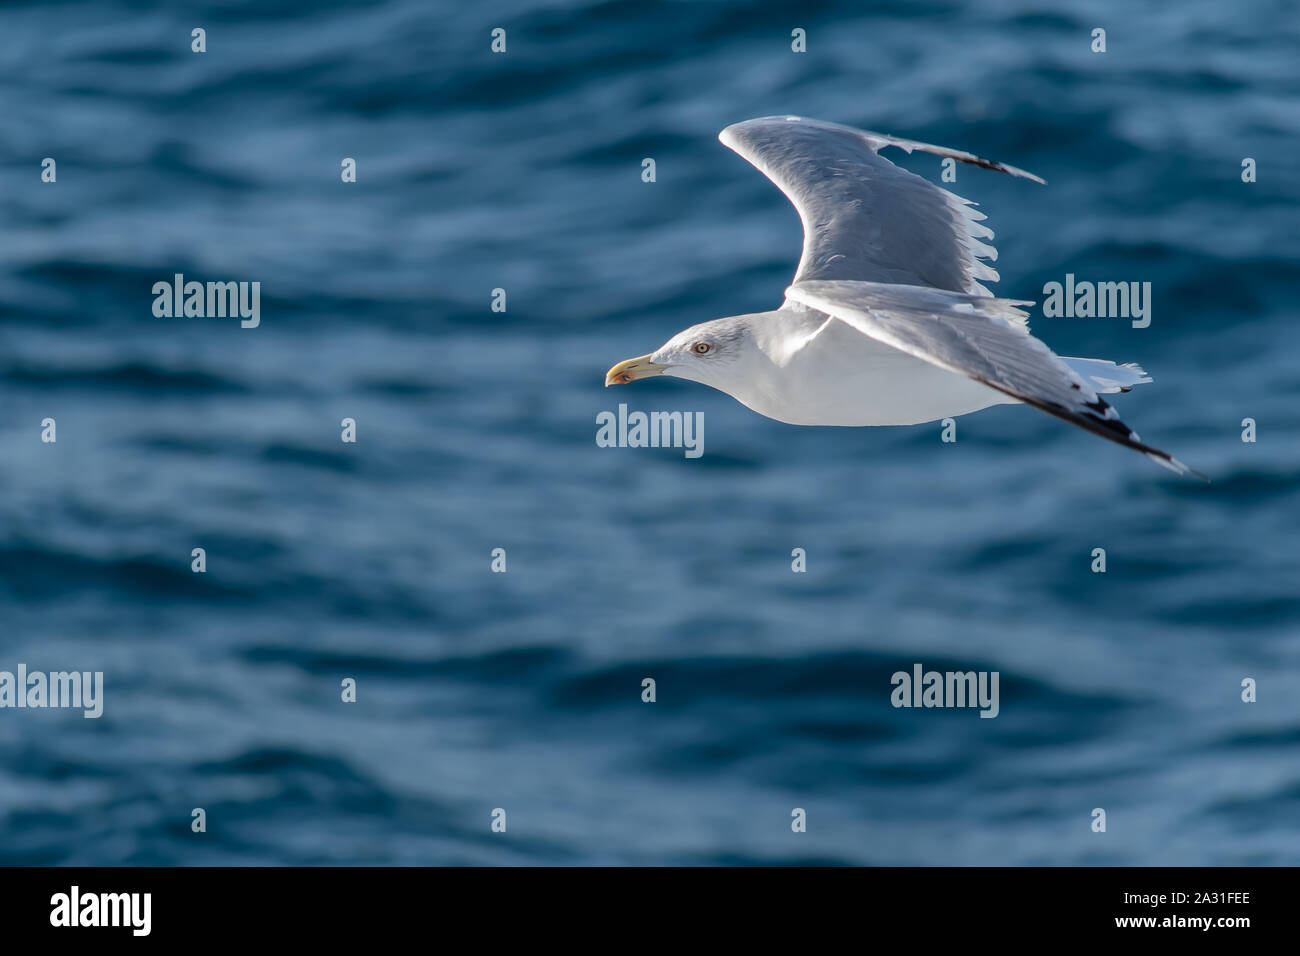 Seagull flying over blue sea Stock Photo